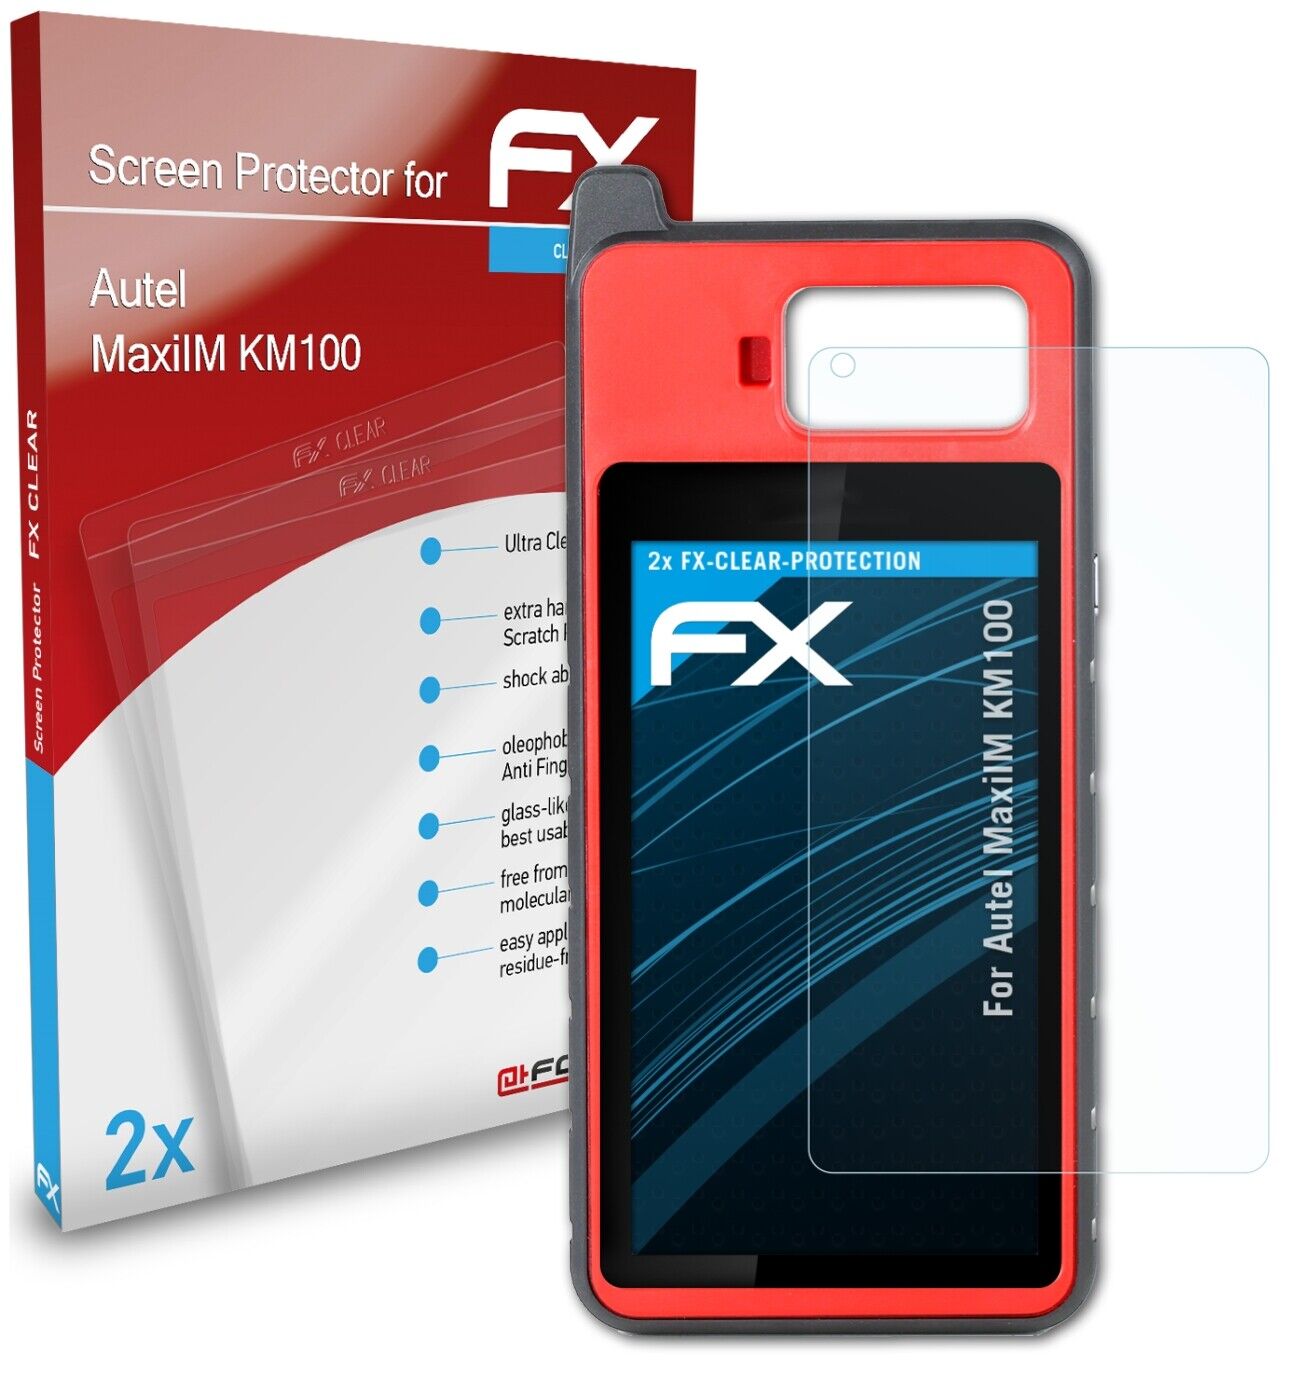 atFoliX 2x Screen Protection Film for Autel MaxiIM KM100 Screen Protector clear